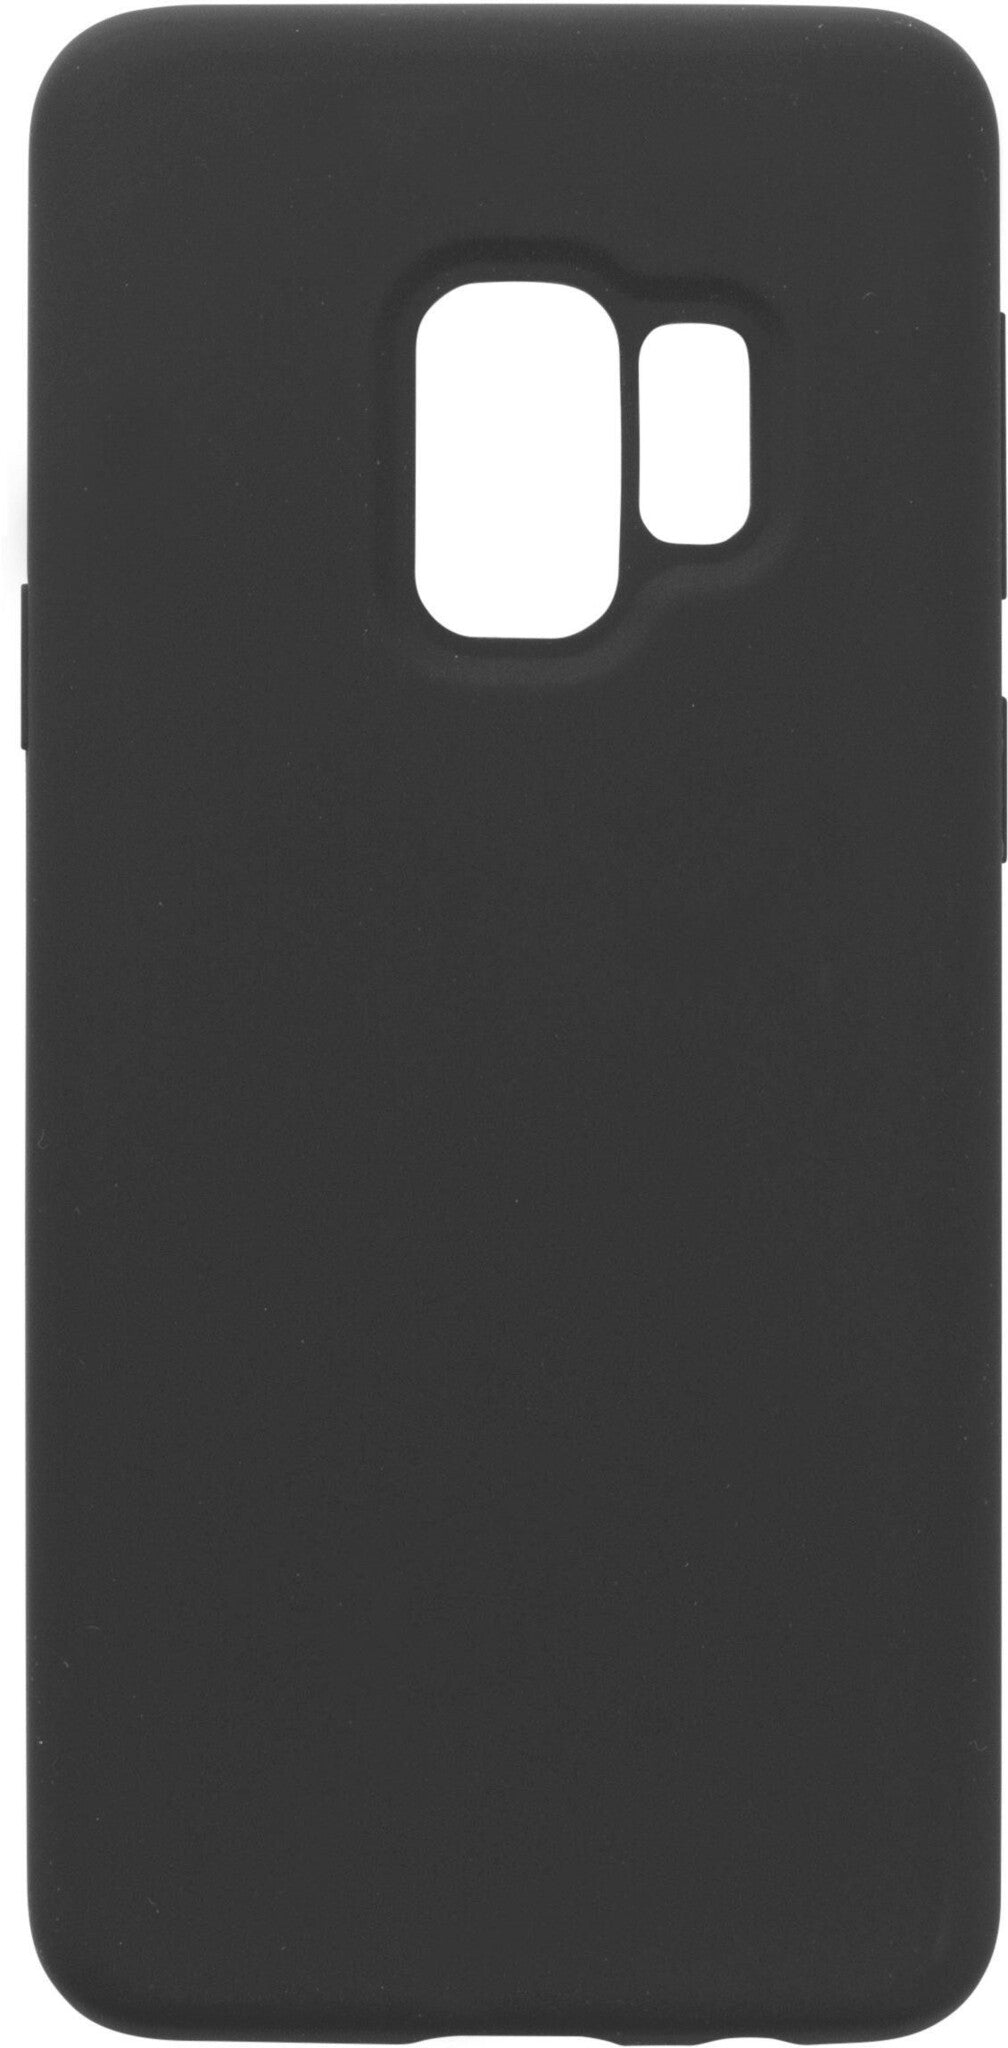 eSTUFF MADRID mobile phone case for Galaxy S9 in Black